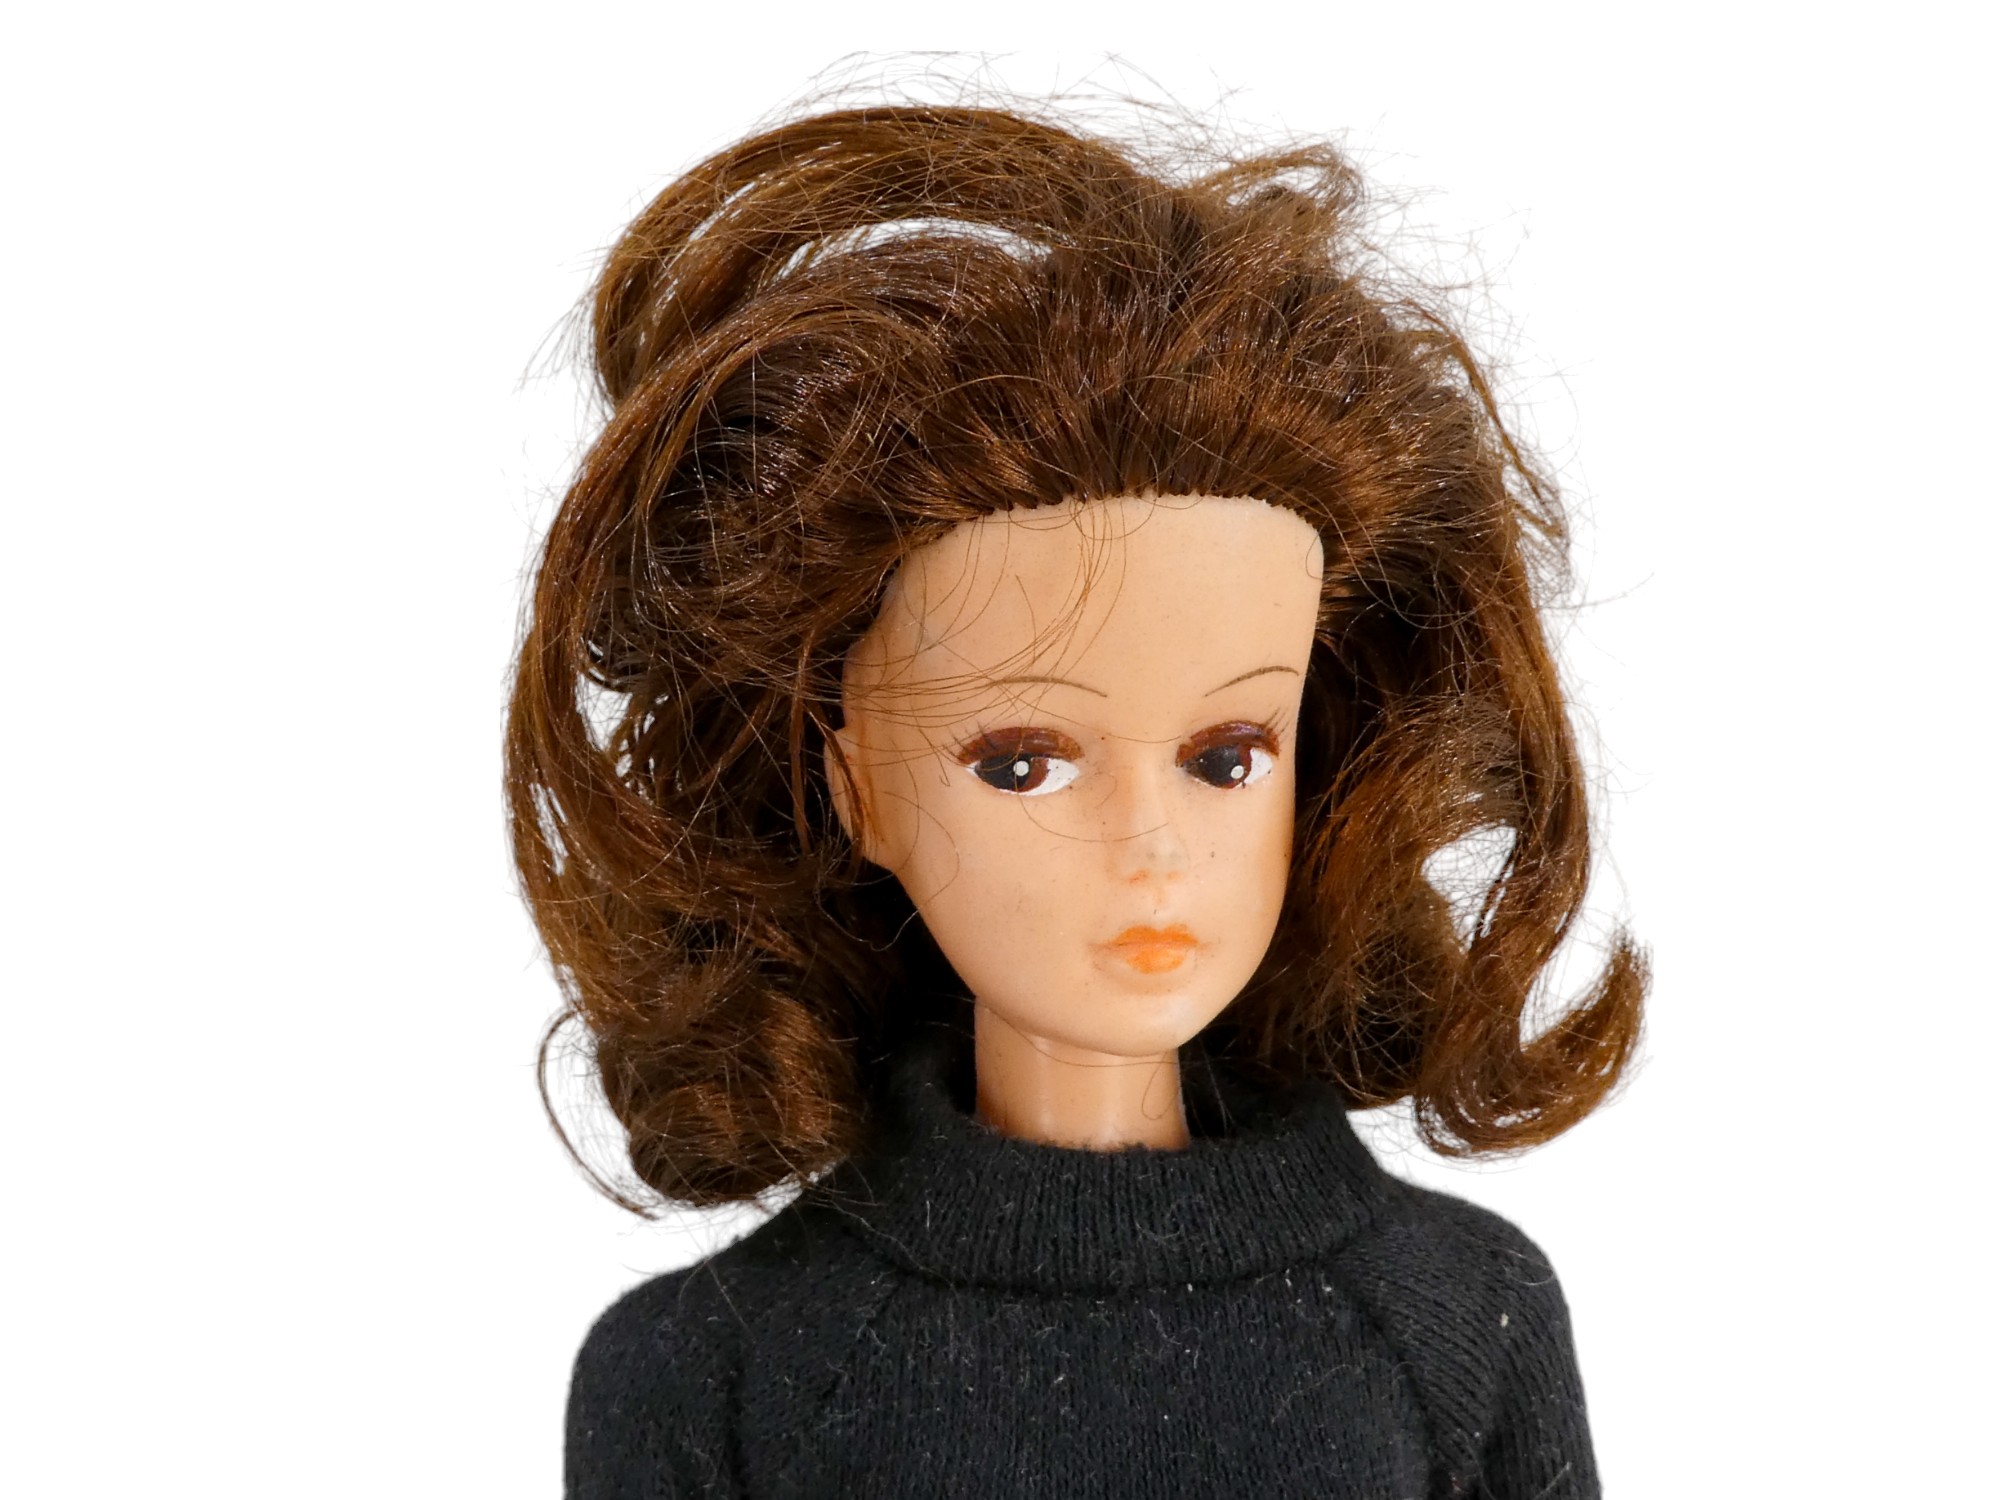 The Avengers Emma Peel vintage doll - possibly Fairylite 1966, wearing black roll neck sweater, - Image 3 of 4